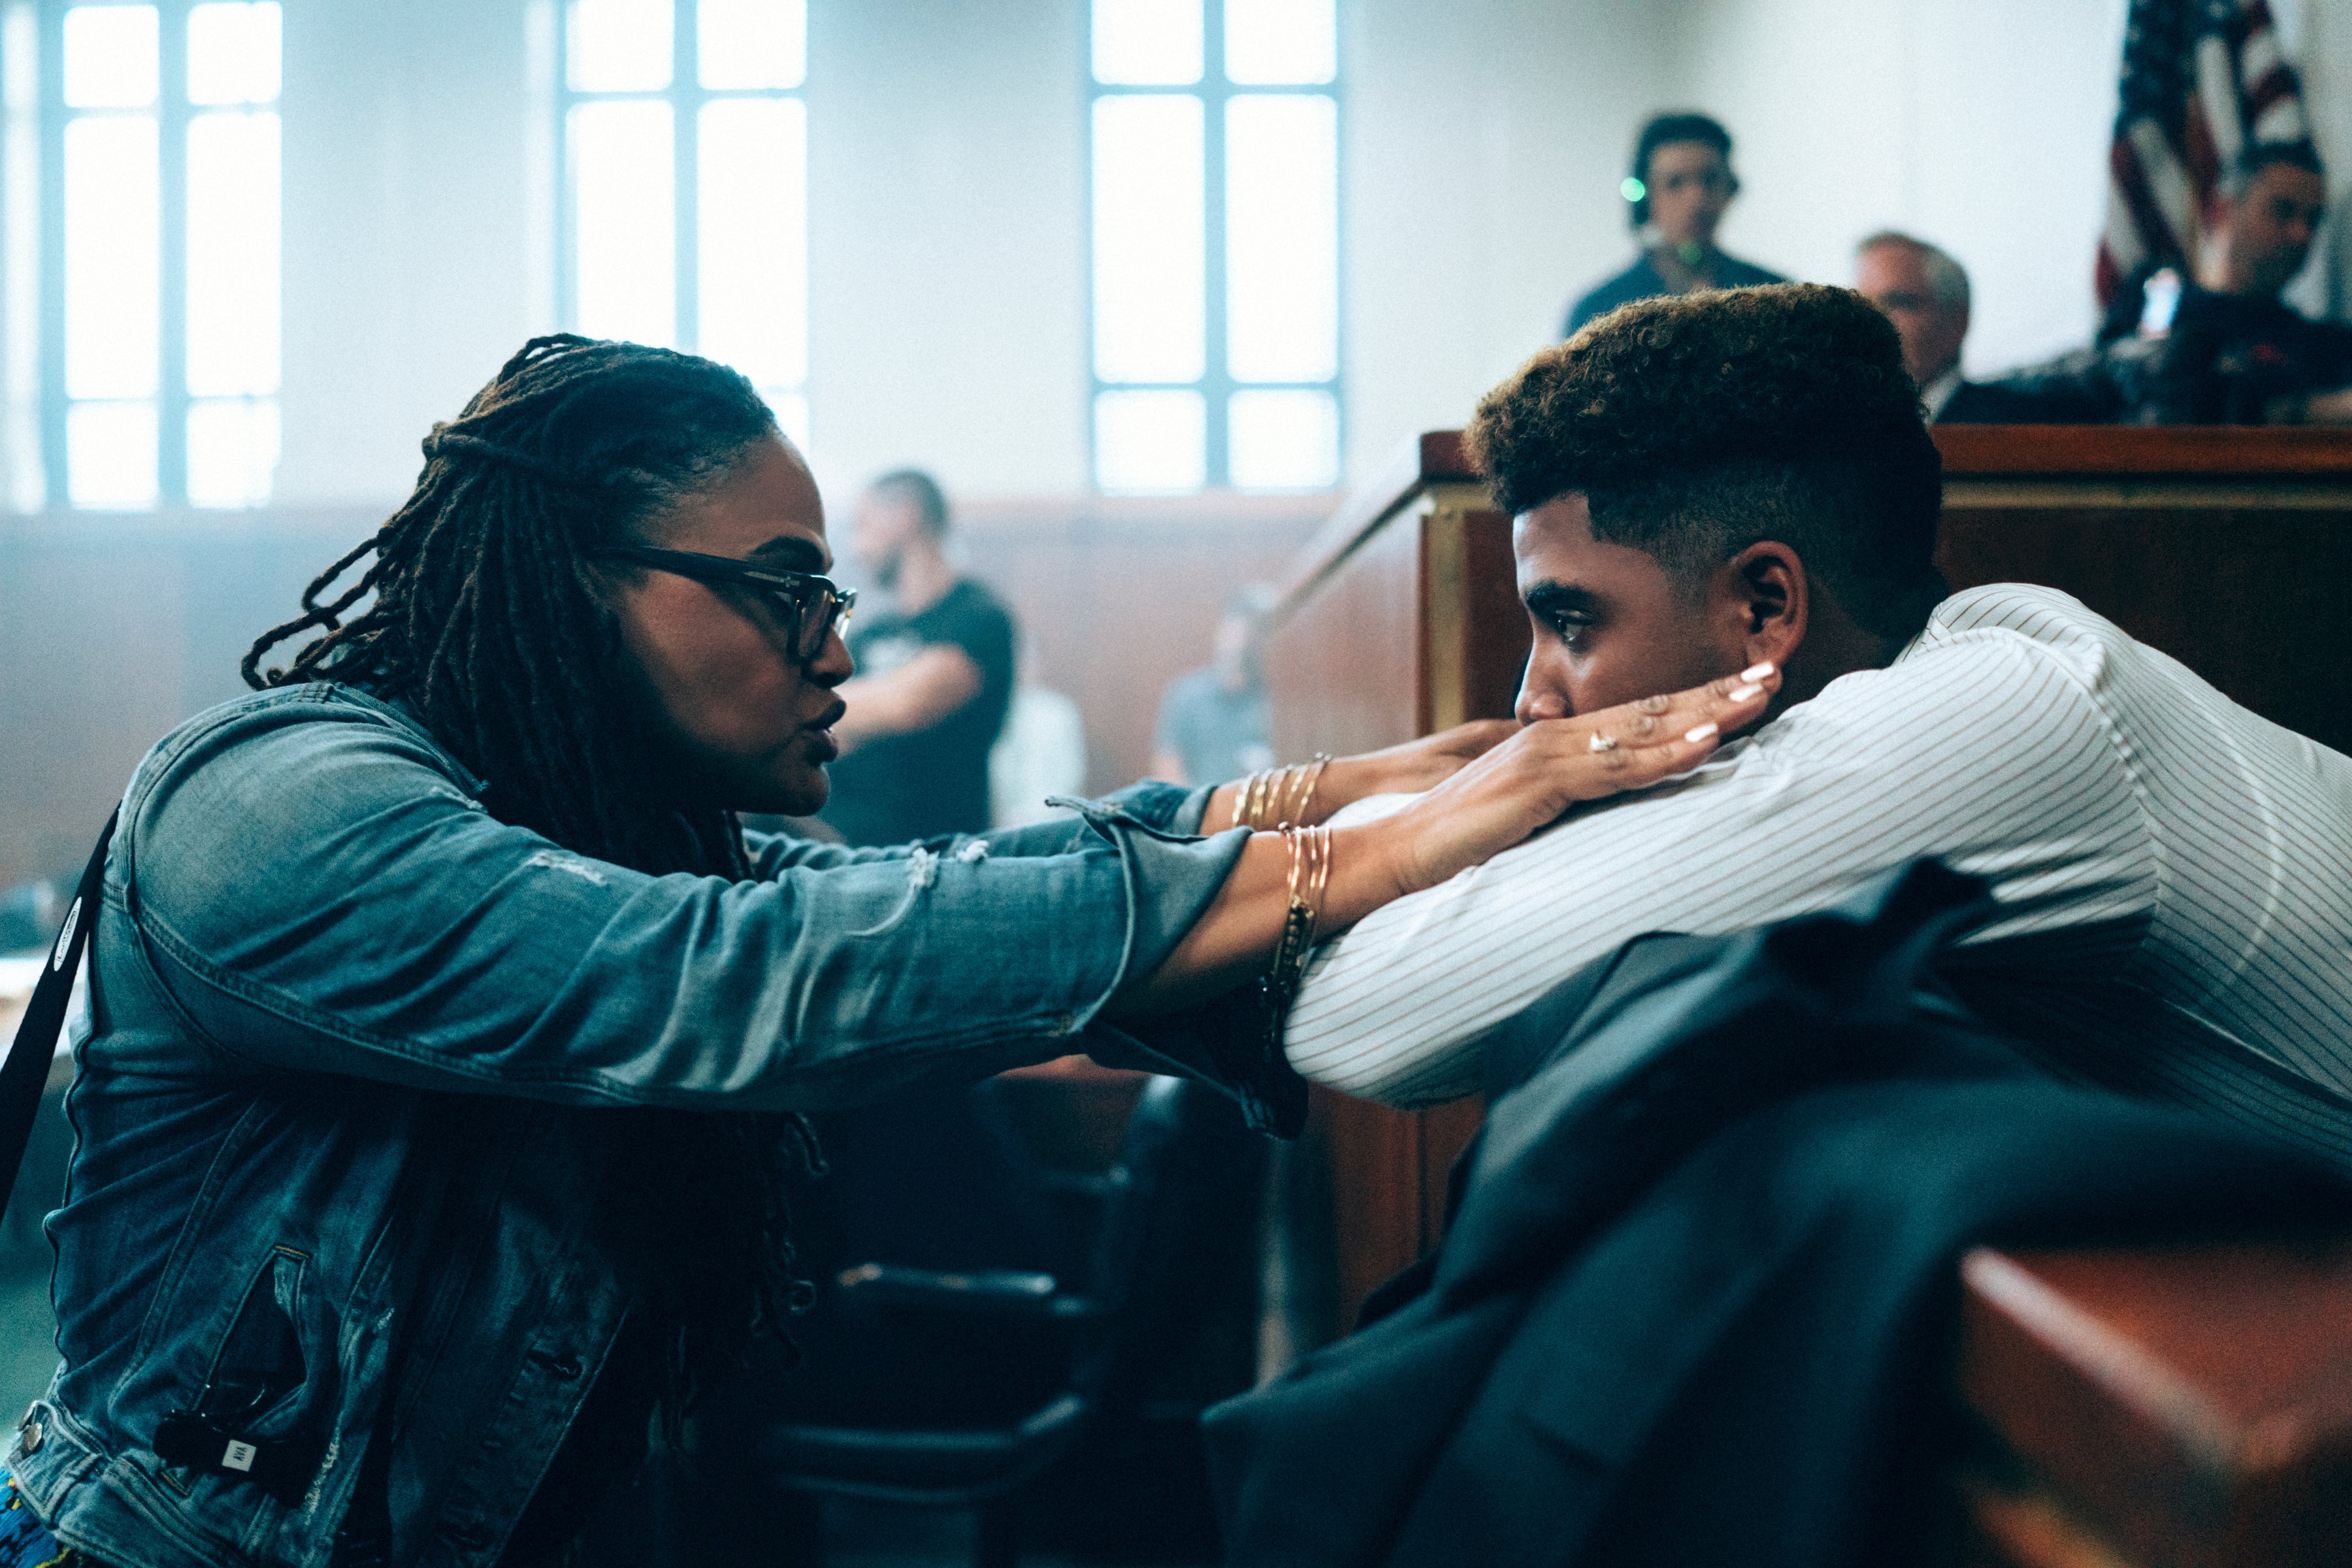 Ava DuVernay and Jharrel Jerome on the set of a courtroom.